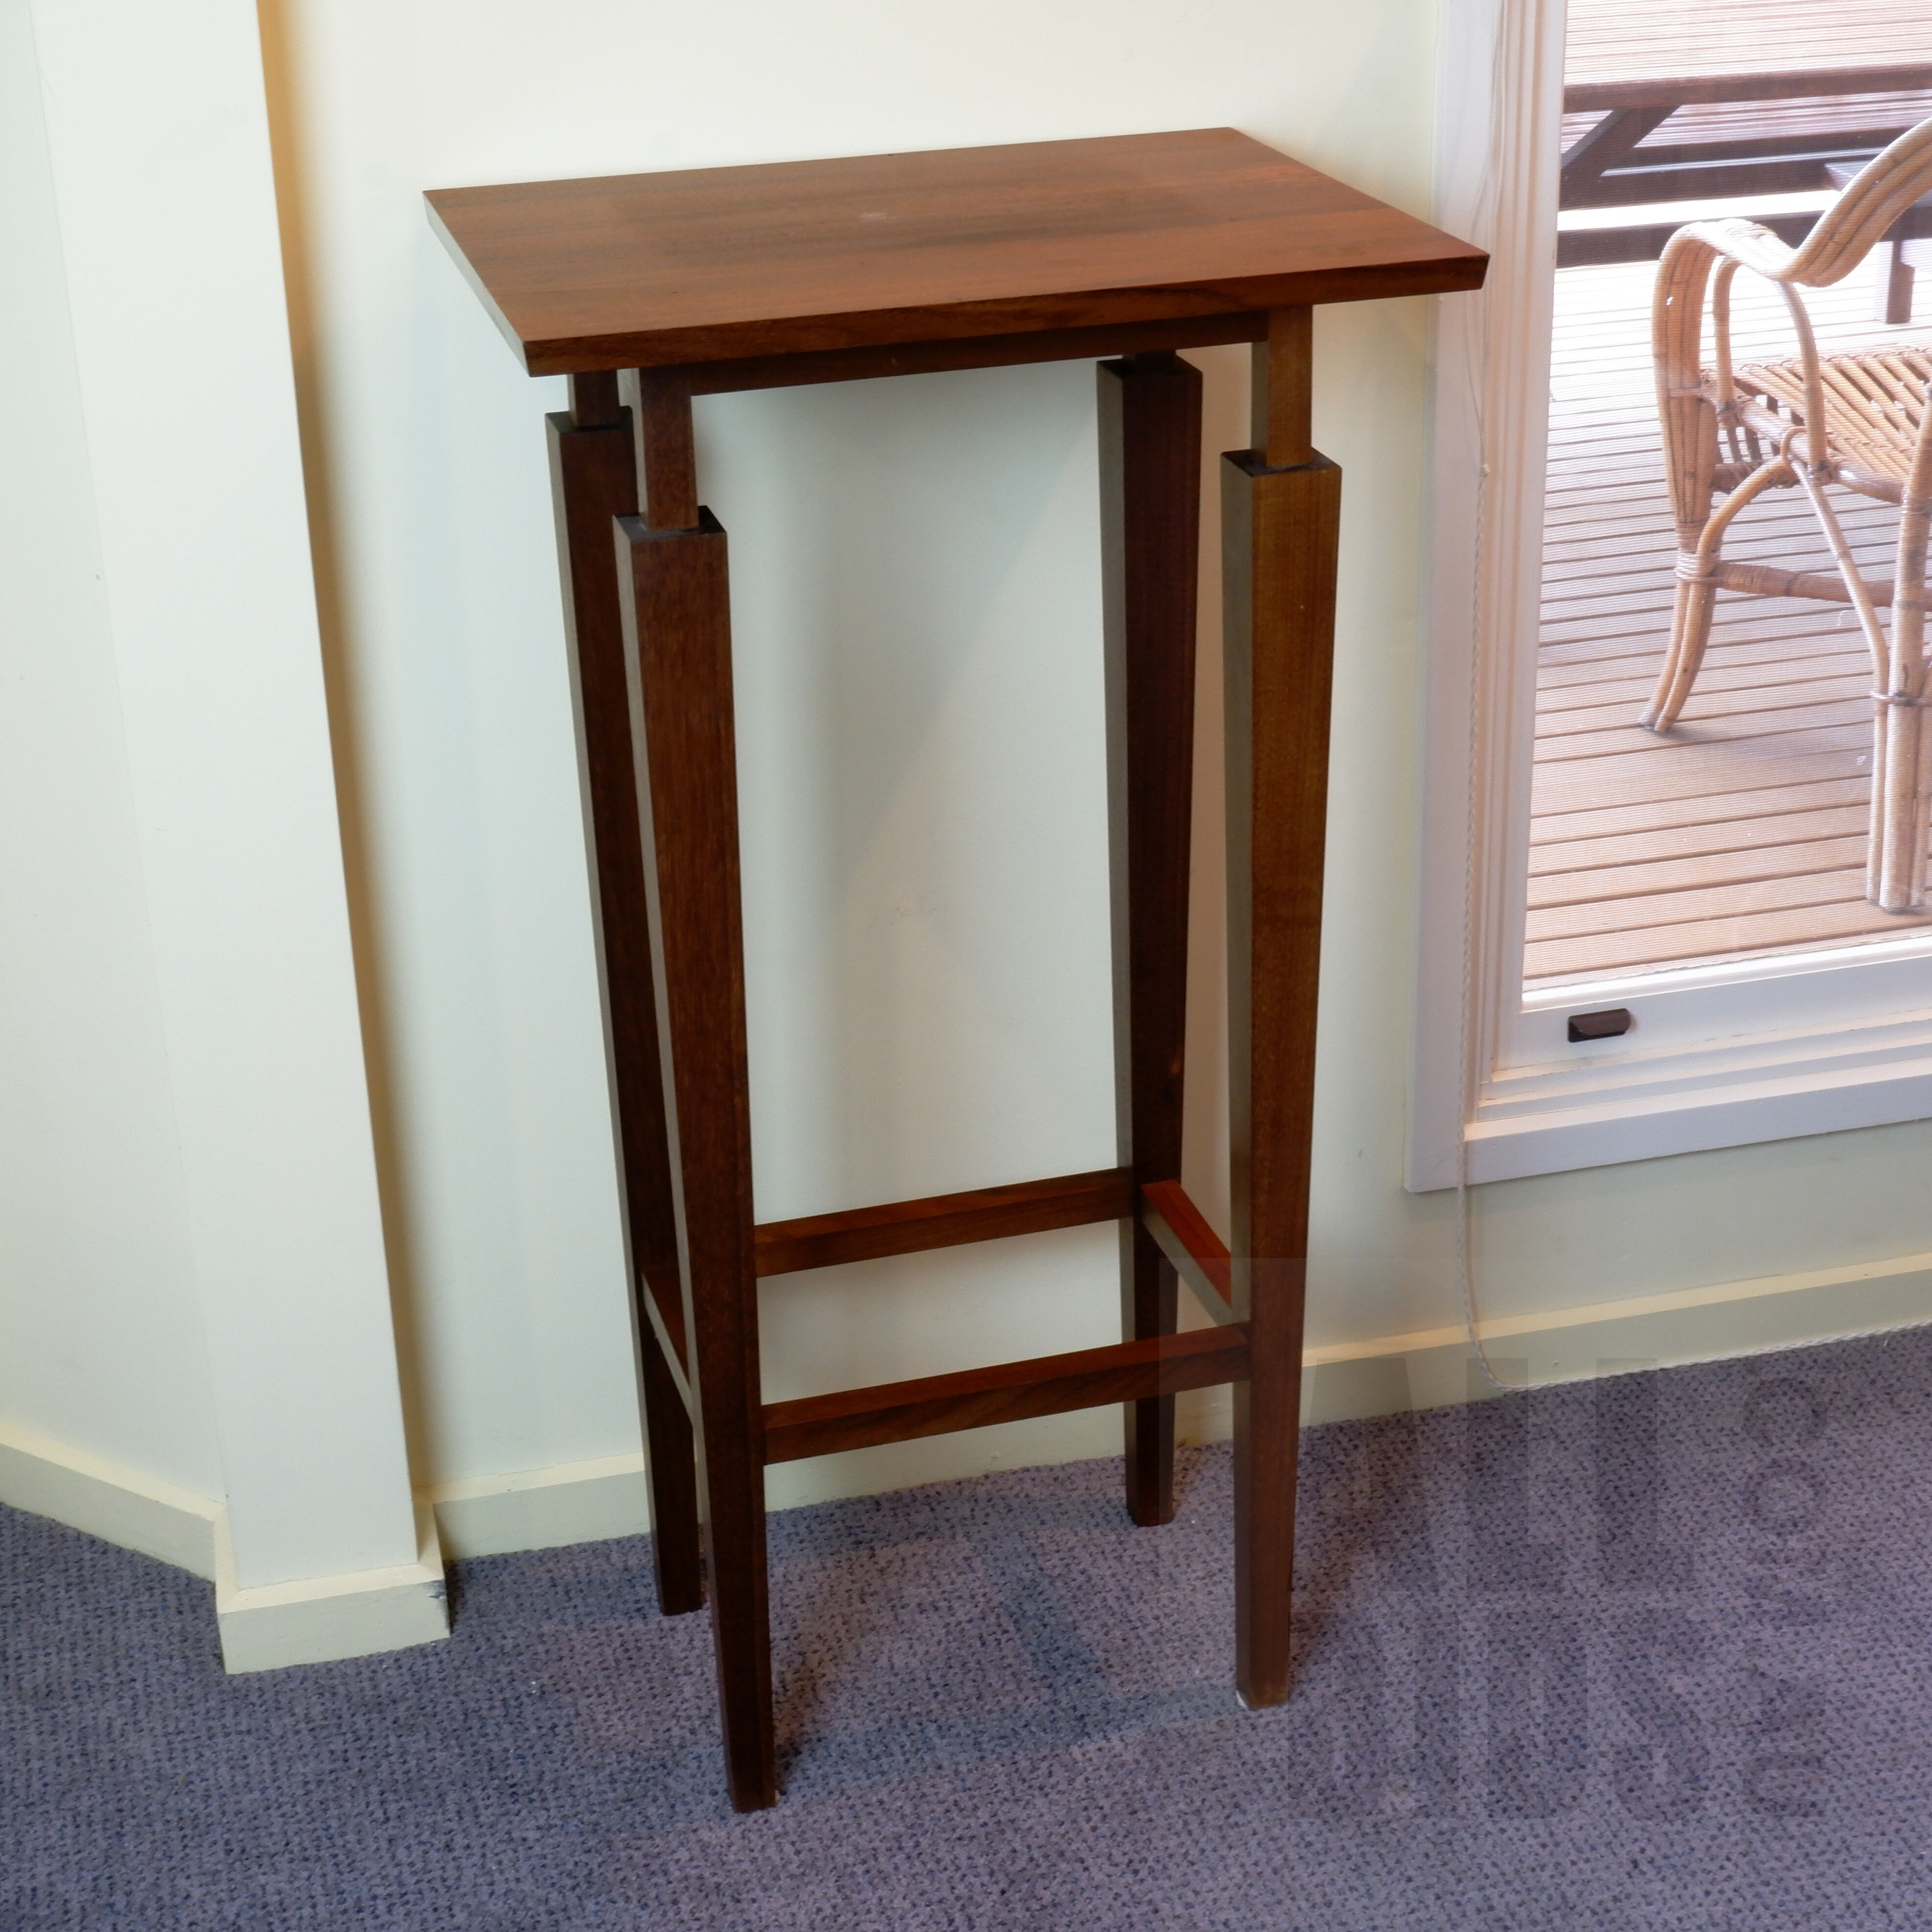 'Bespoke Australian Blackwood Stand with Tapered Legs, Made by a Canberra School of Art Graduate Circa 1994'